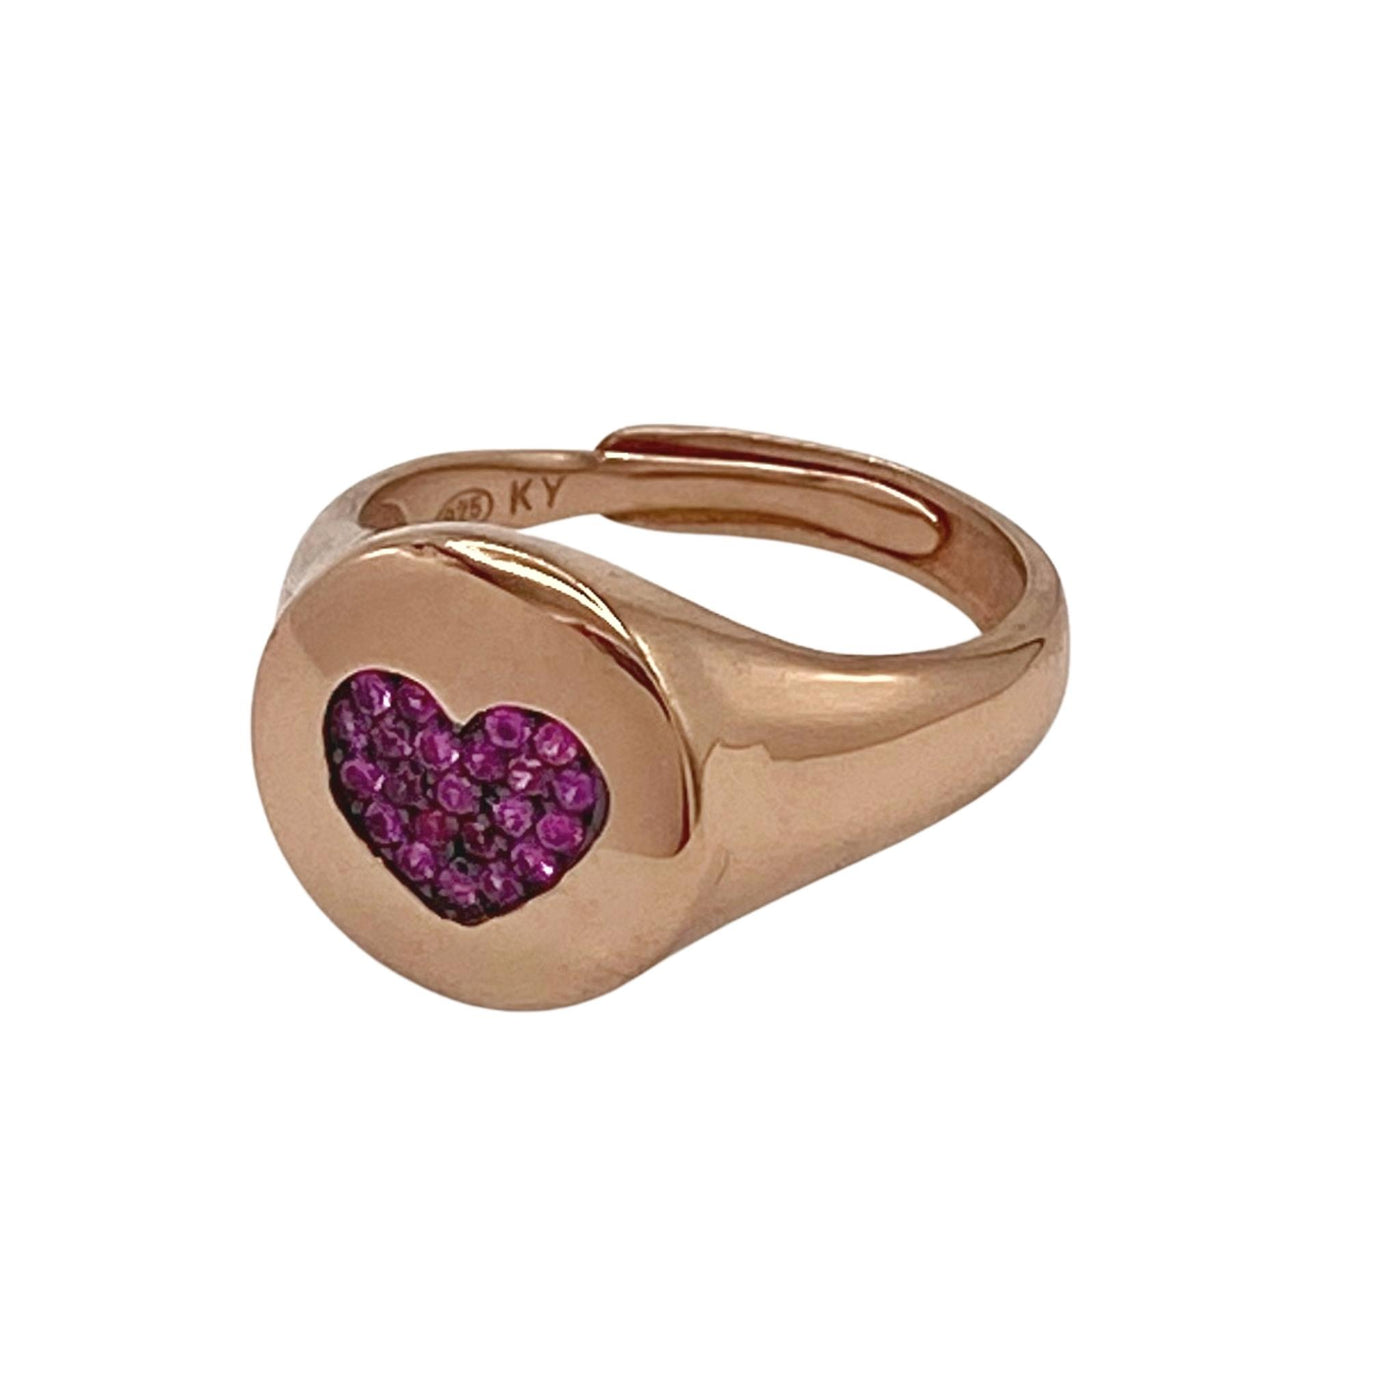 Silver chevalier ring with heart